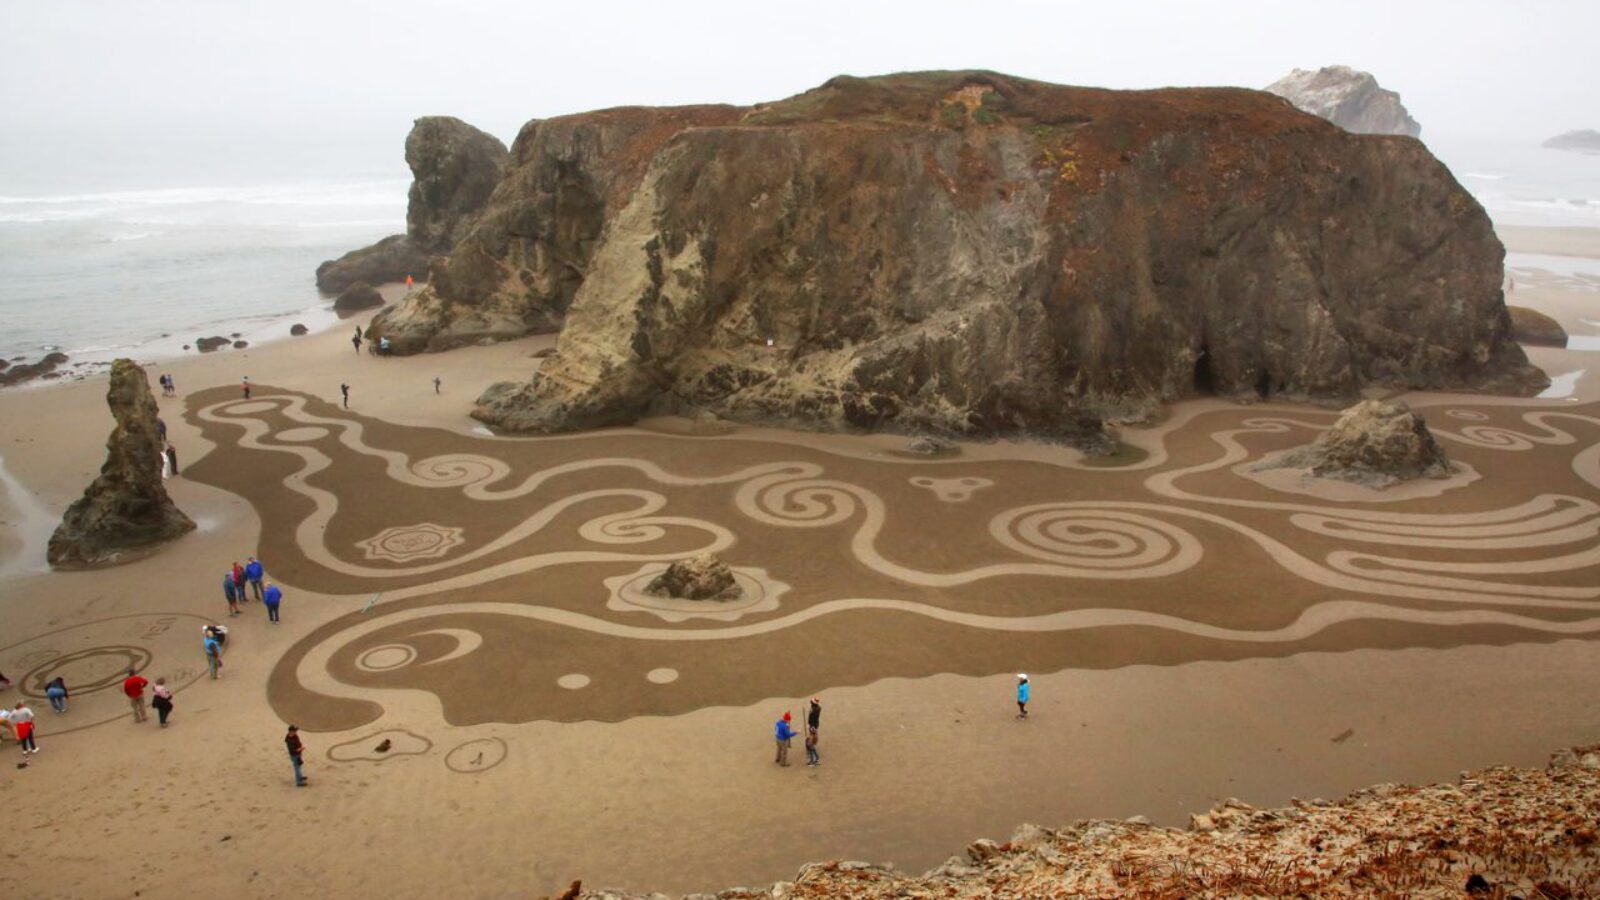 aerial view of Tourists at the Bandon Beach with designs on the sand